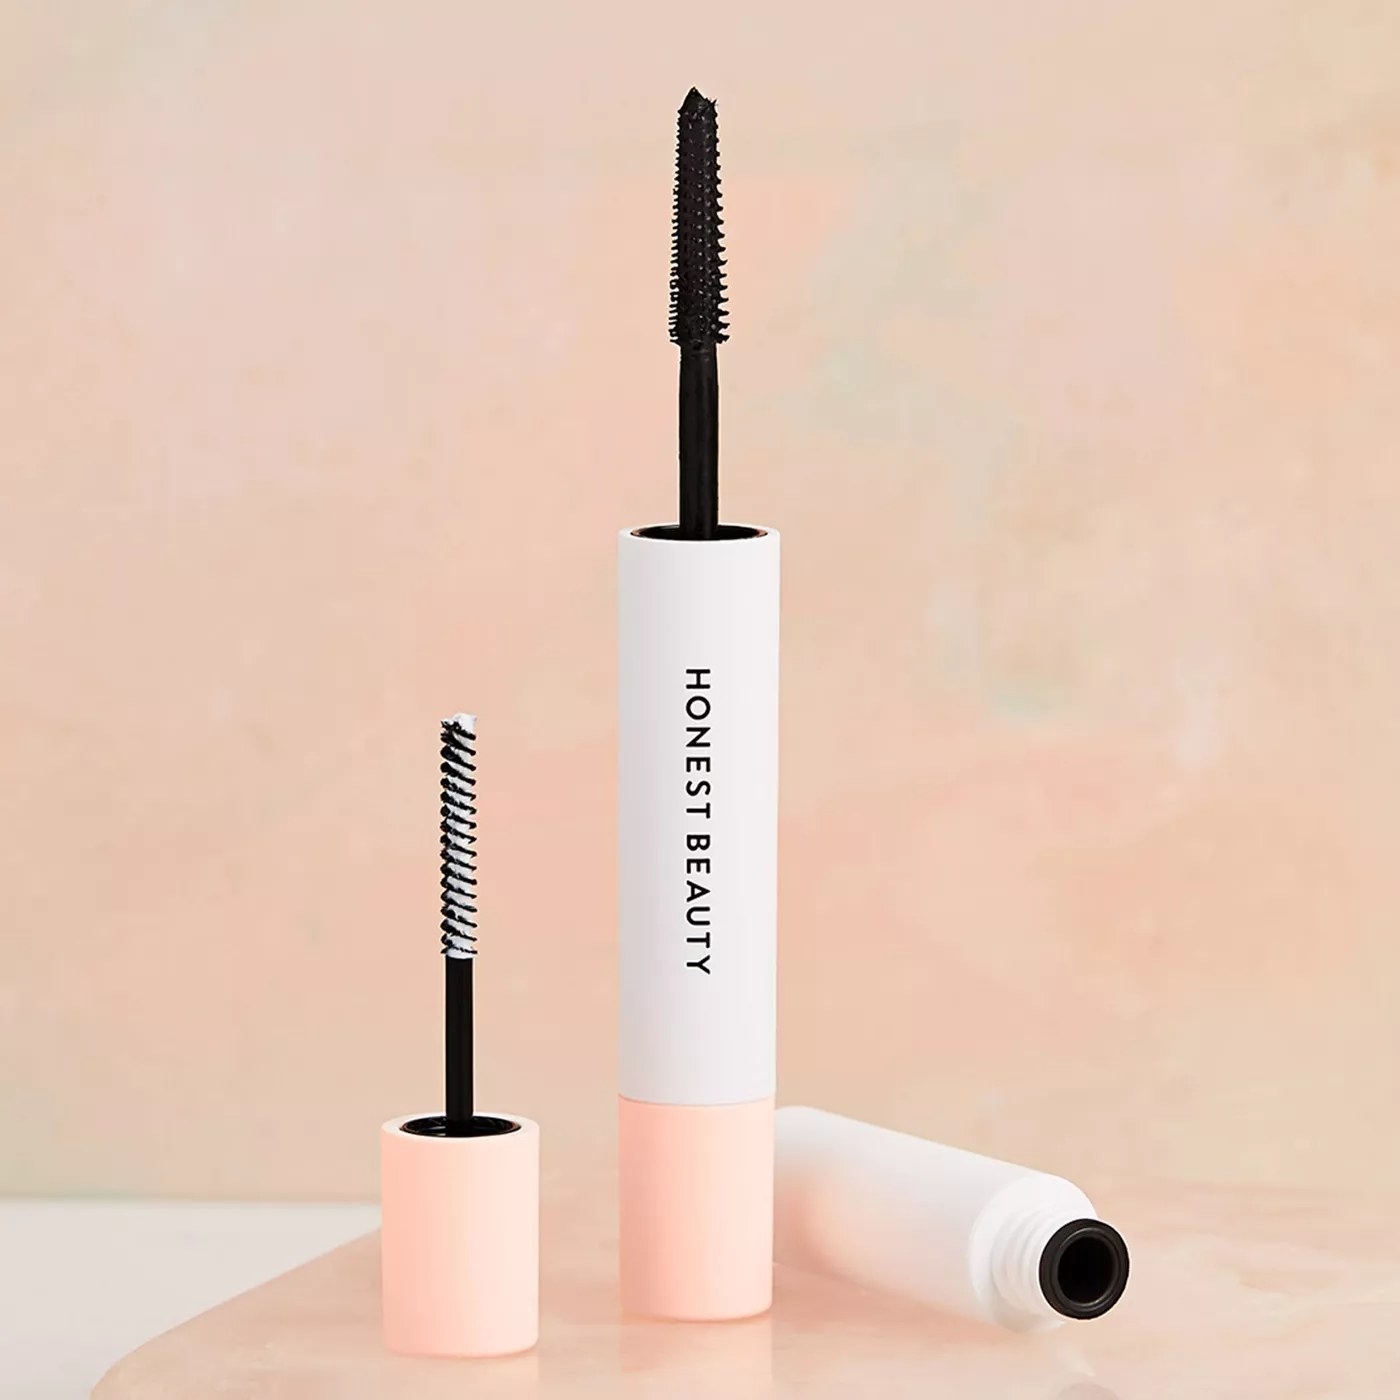 The Honest Beauty mascara with two separate wands for the lash primer and mascara